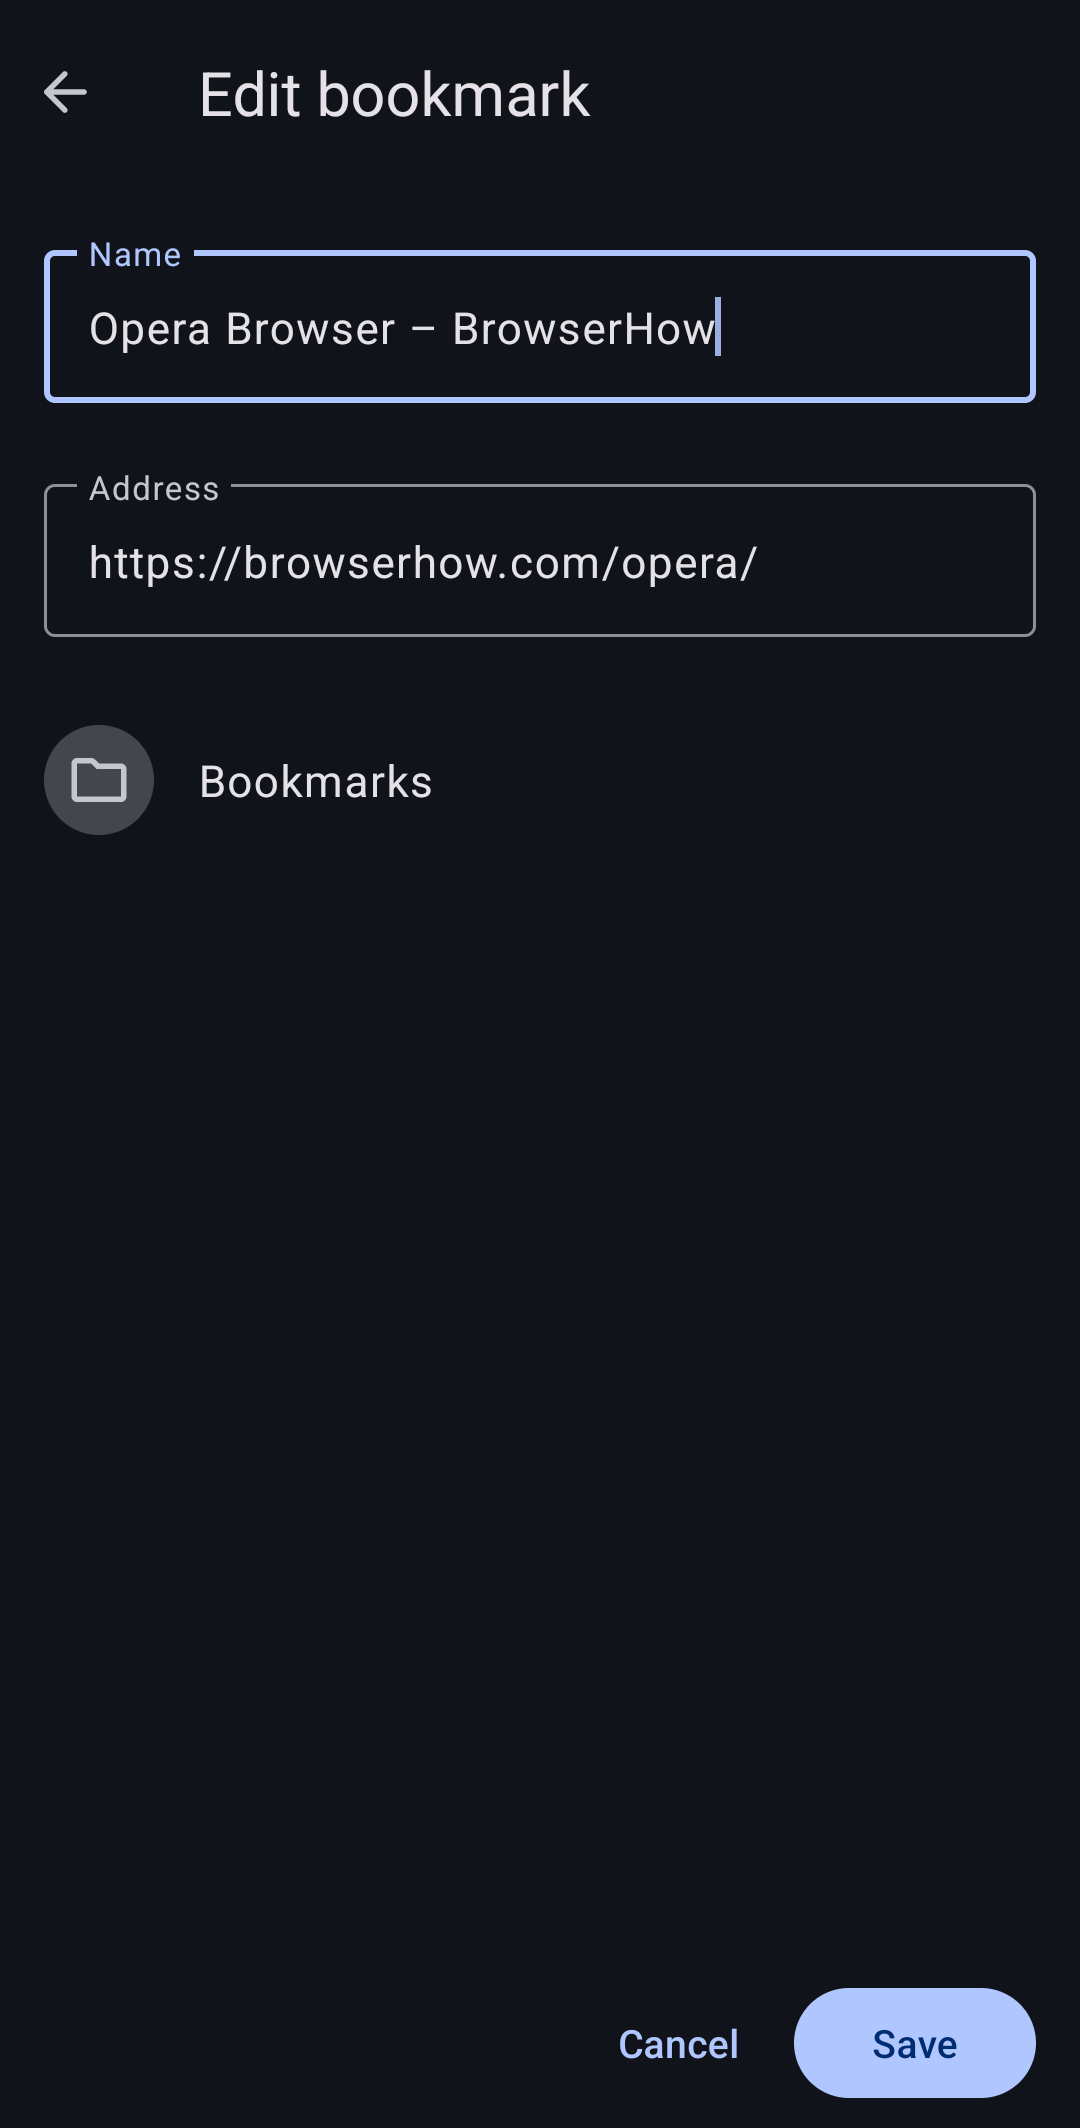 Edit Bookmark Screen in Opera on Android